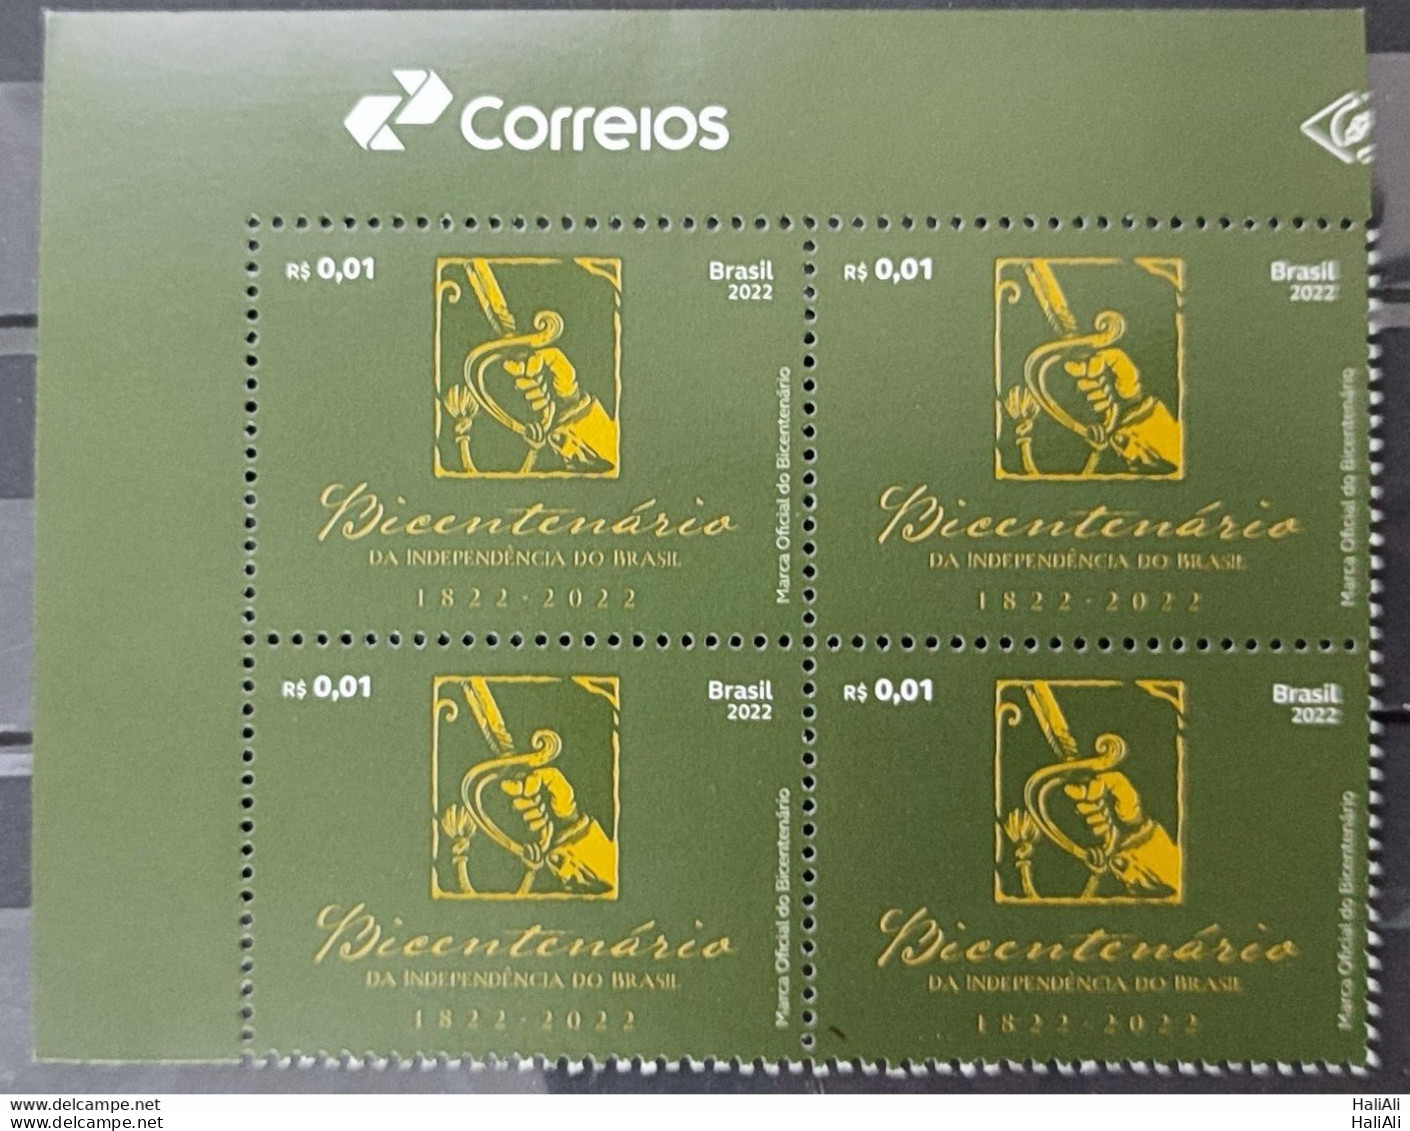 C 4055 Brazil Stamp Bicentennial Of Independence Official Brand Sword Portugal 2022 Block Of 4 Vignette Correios - Nuovi